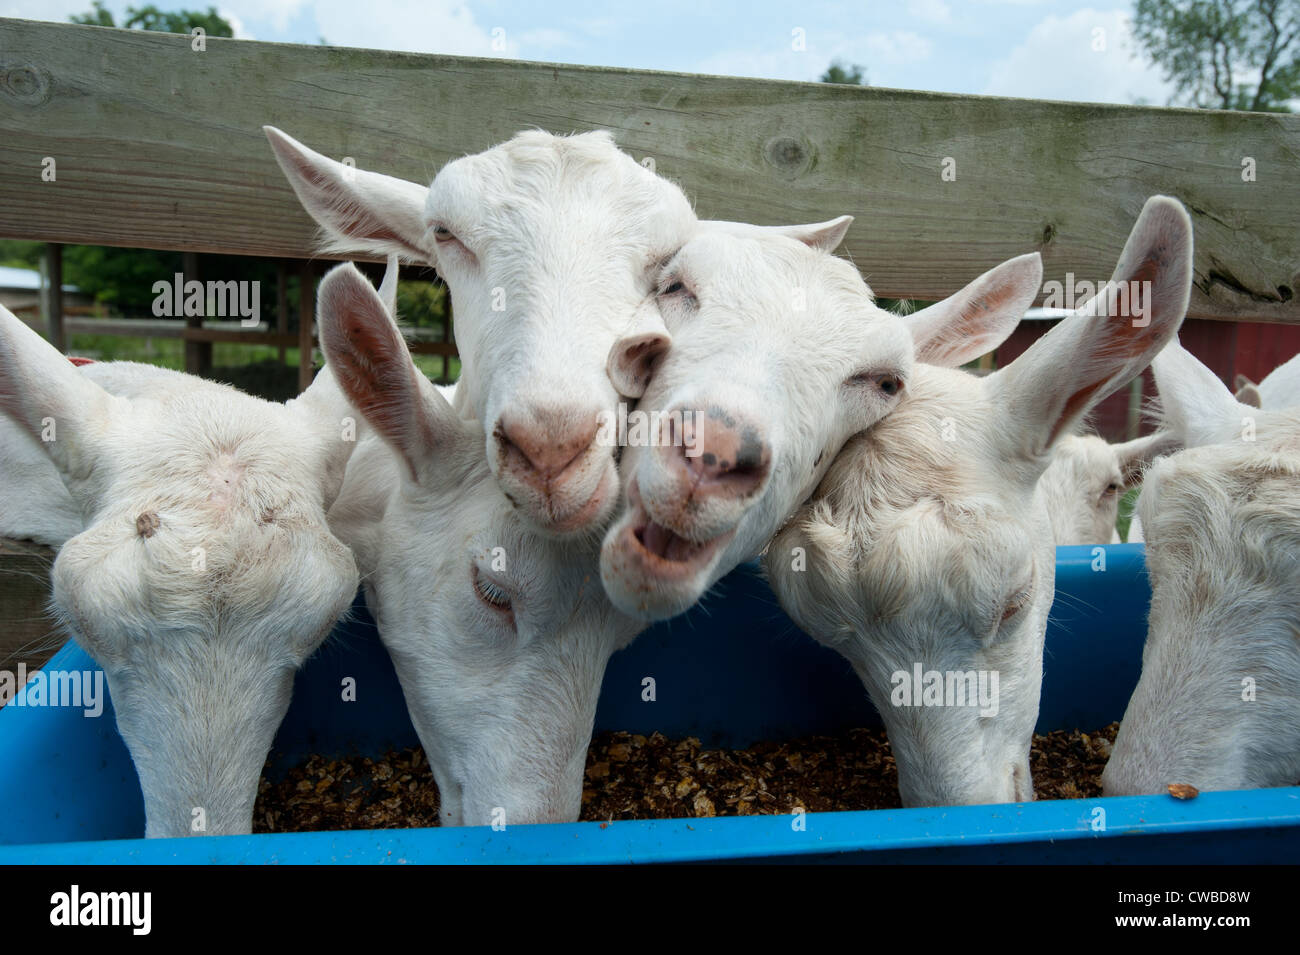 Dairy goat farm breeder and cheese producers Stock Photo